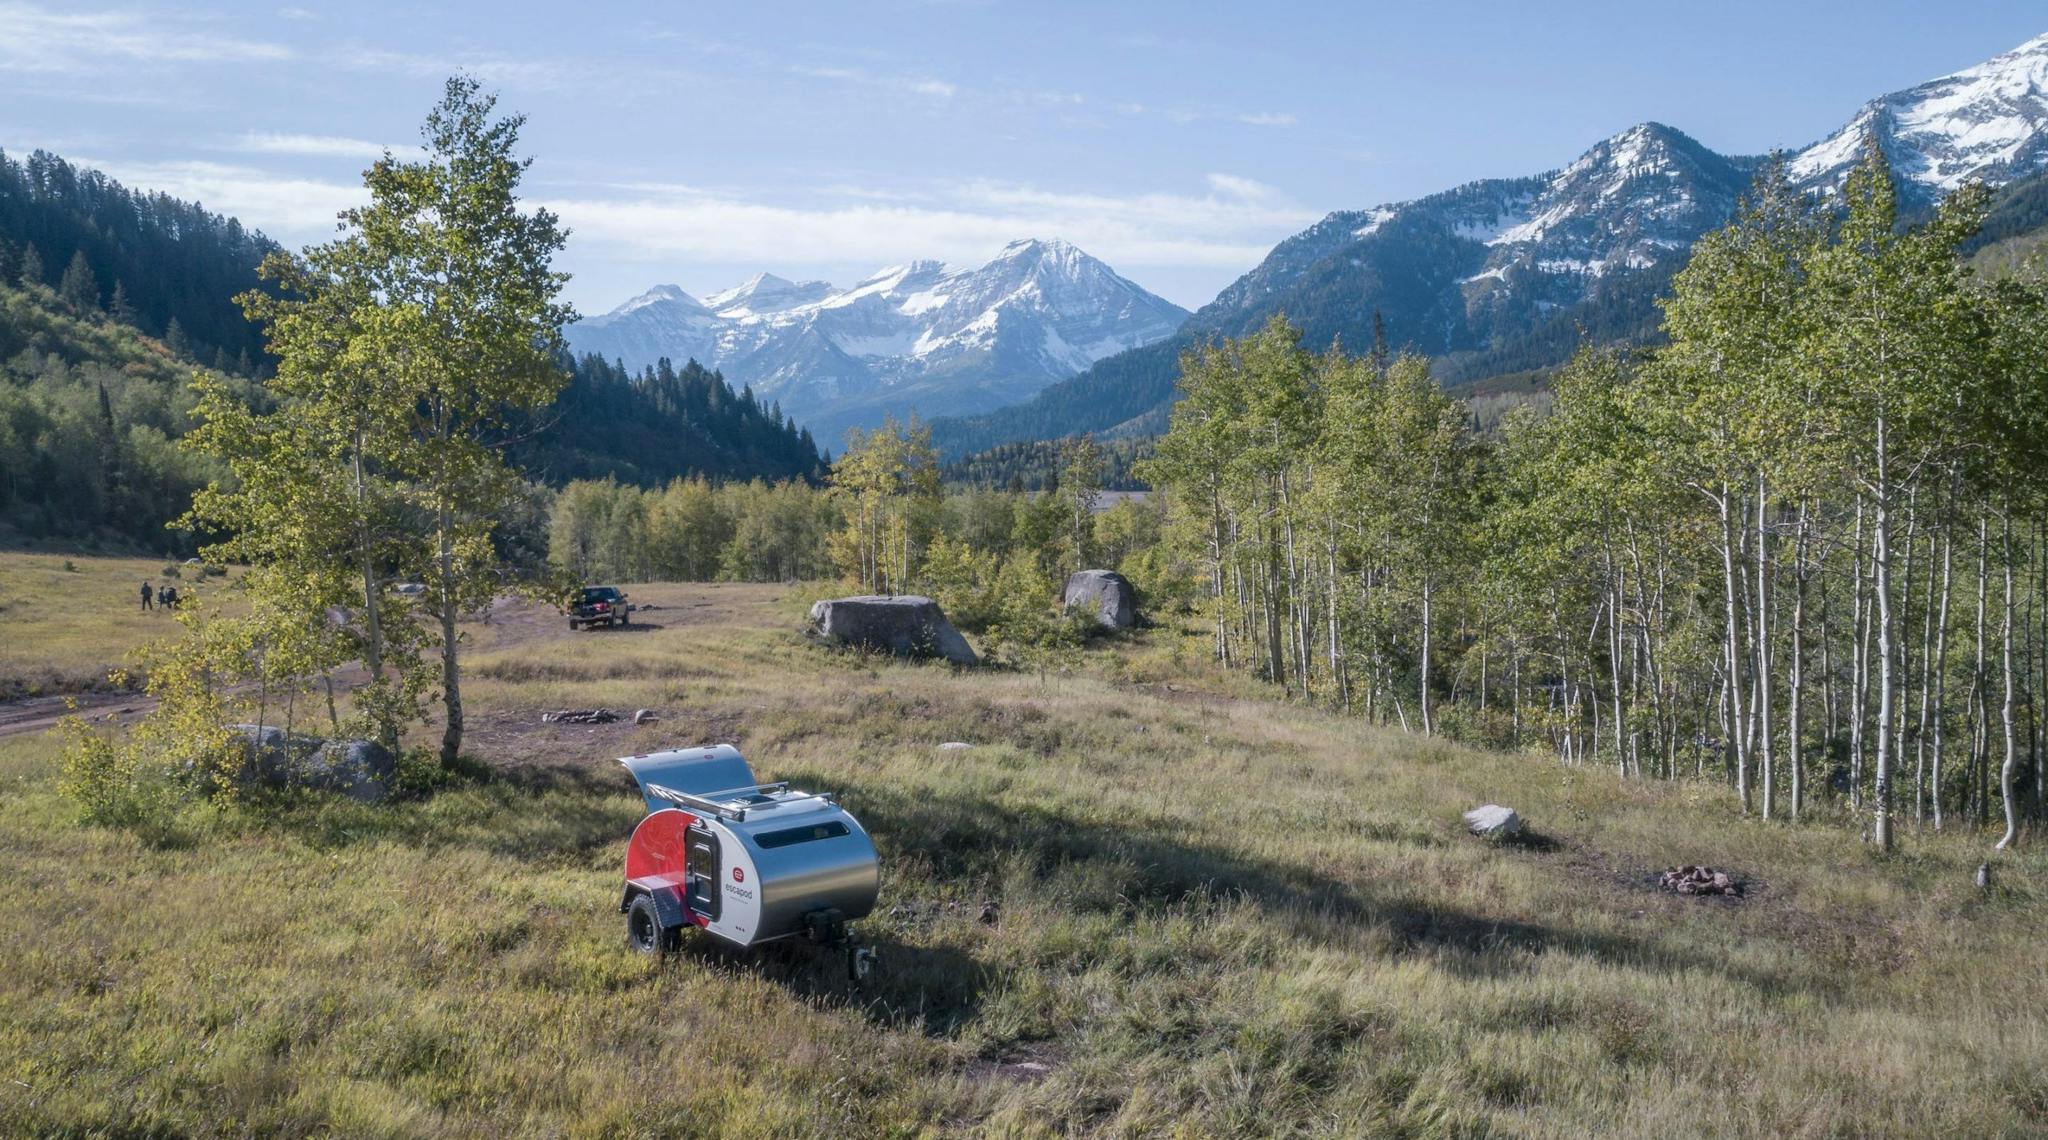 A white and red teardrop camper, in a remote area with trees and mountains in the background.